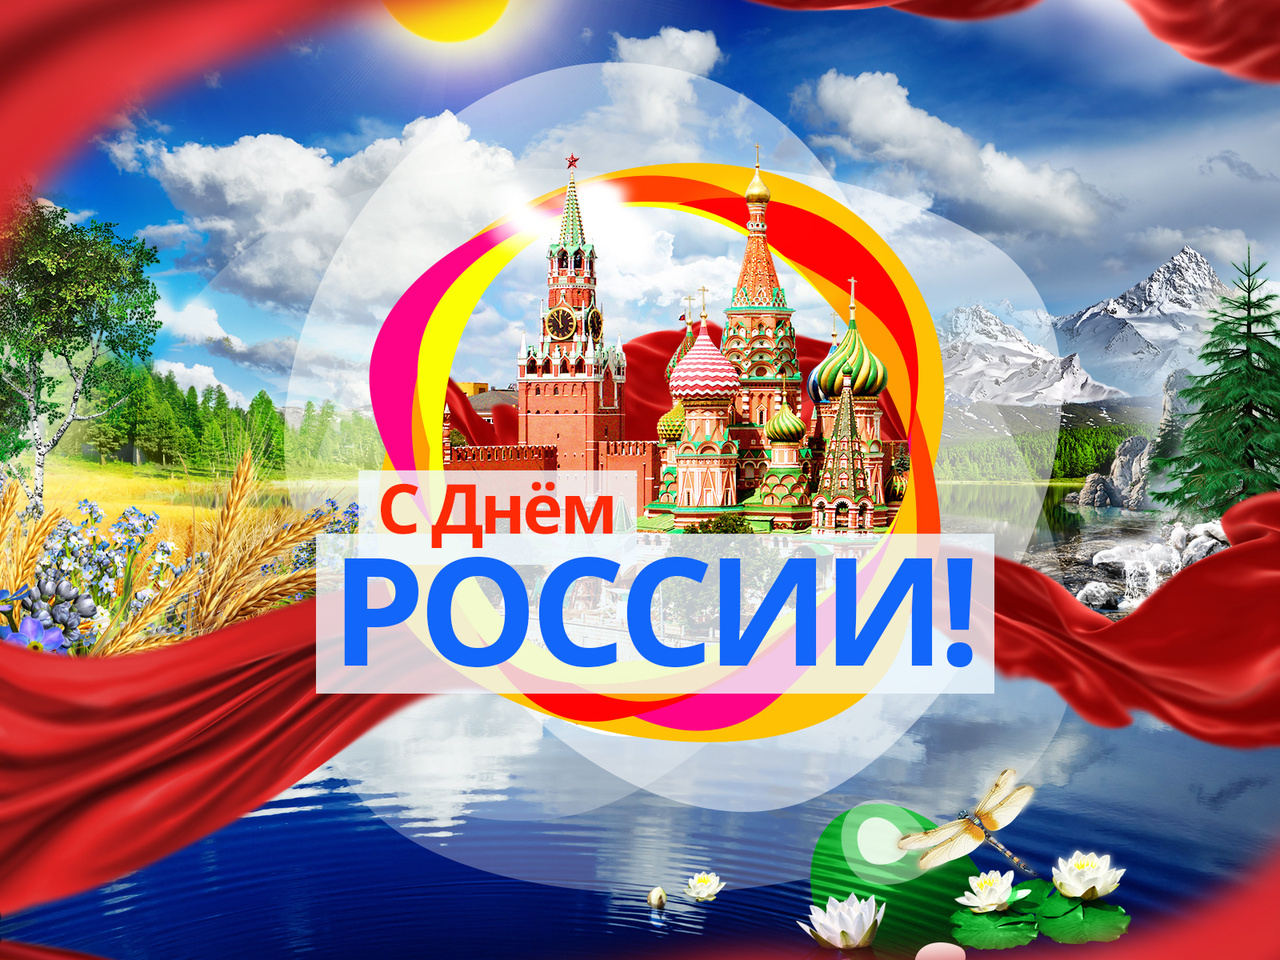 Happy Holidays! - Russia, Holidays, Russia Day, Independence Day